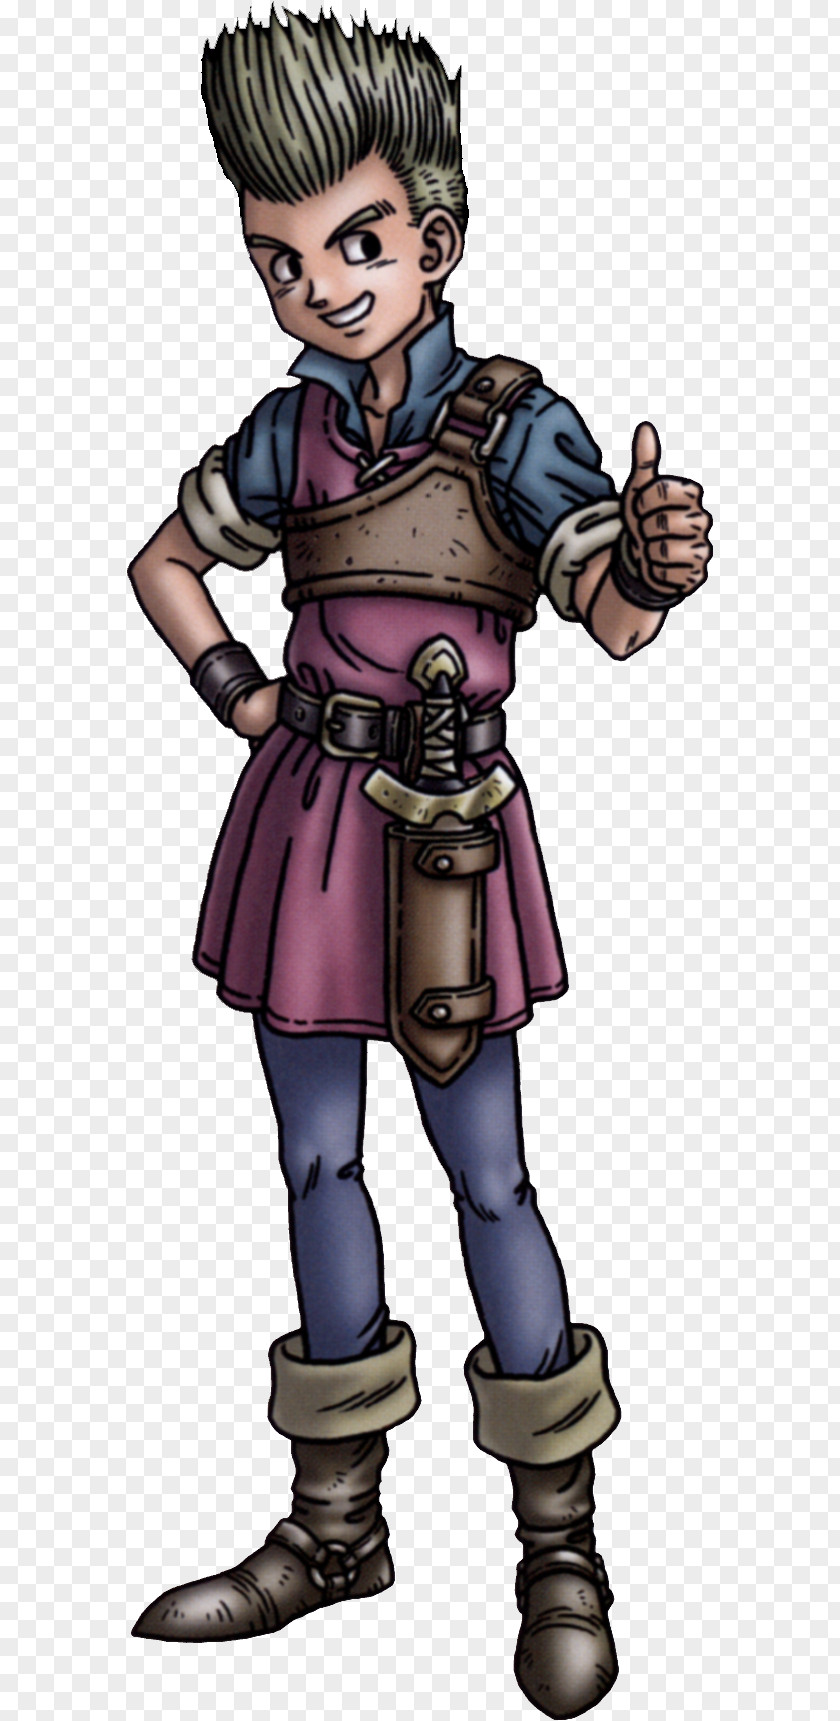 Fright Dragon Quest IX Monsters: Terry No Wonderland 3D X VIII Warrior Monsters 2 PNG